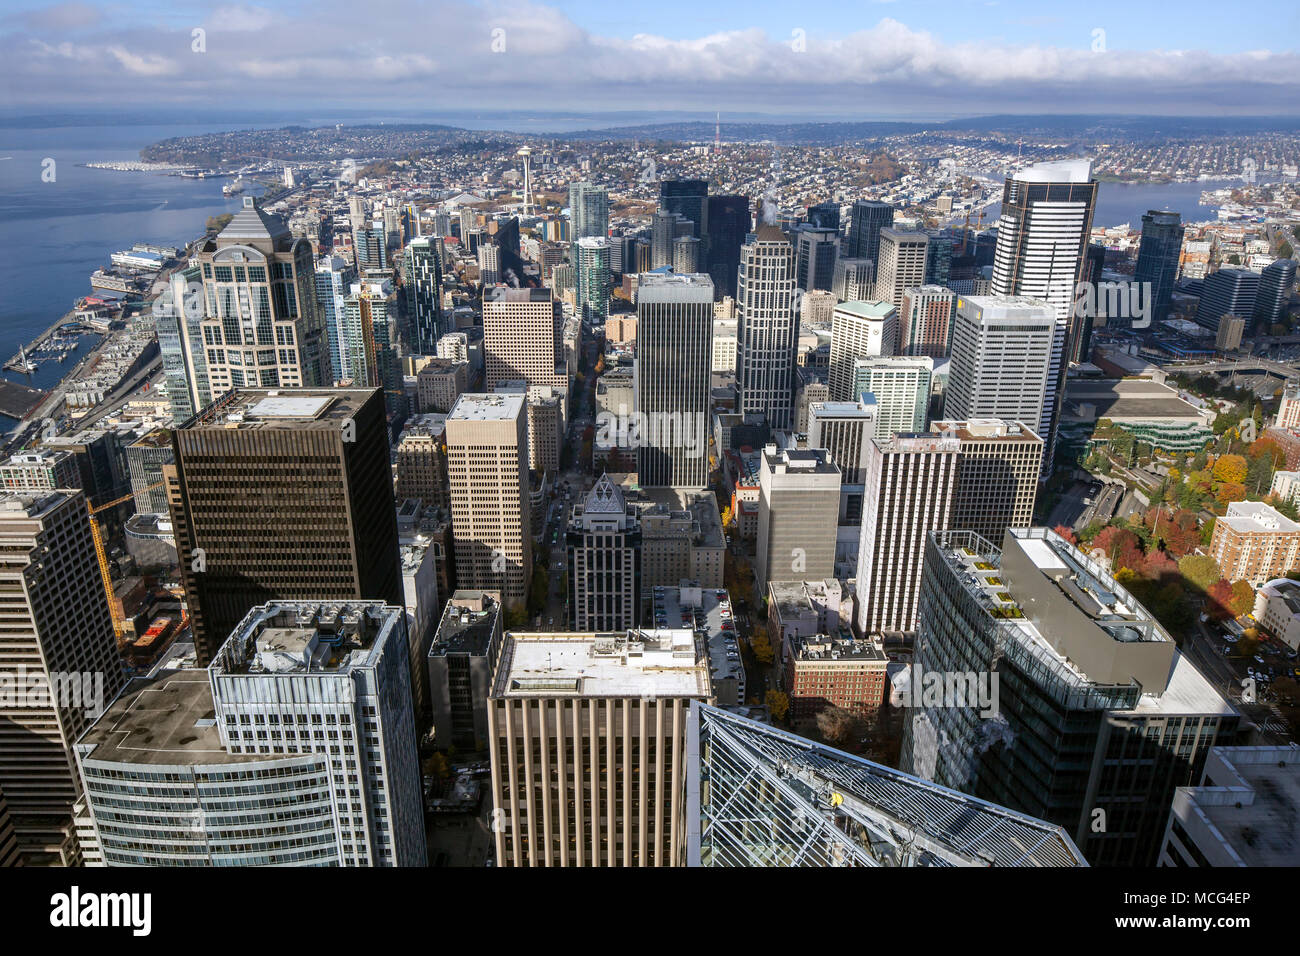 WA14324-00...WASHINGTON -View Seattle's downtown core from the Sky View Observatory on the 73 floor of the Columbia Center building.cty Stock Photo